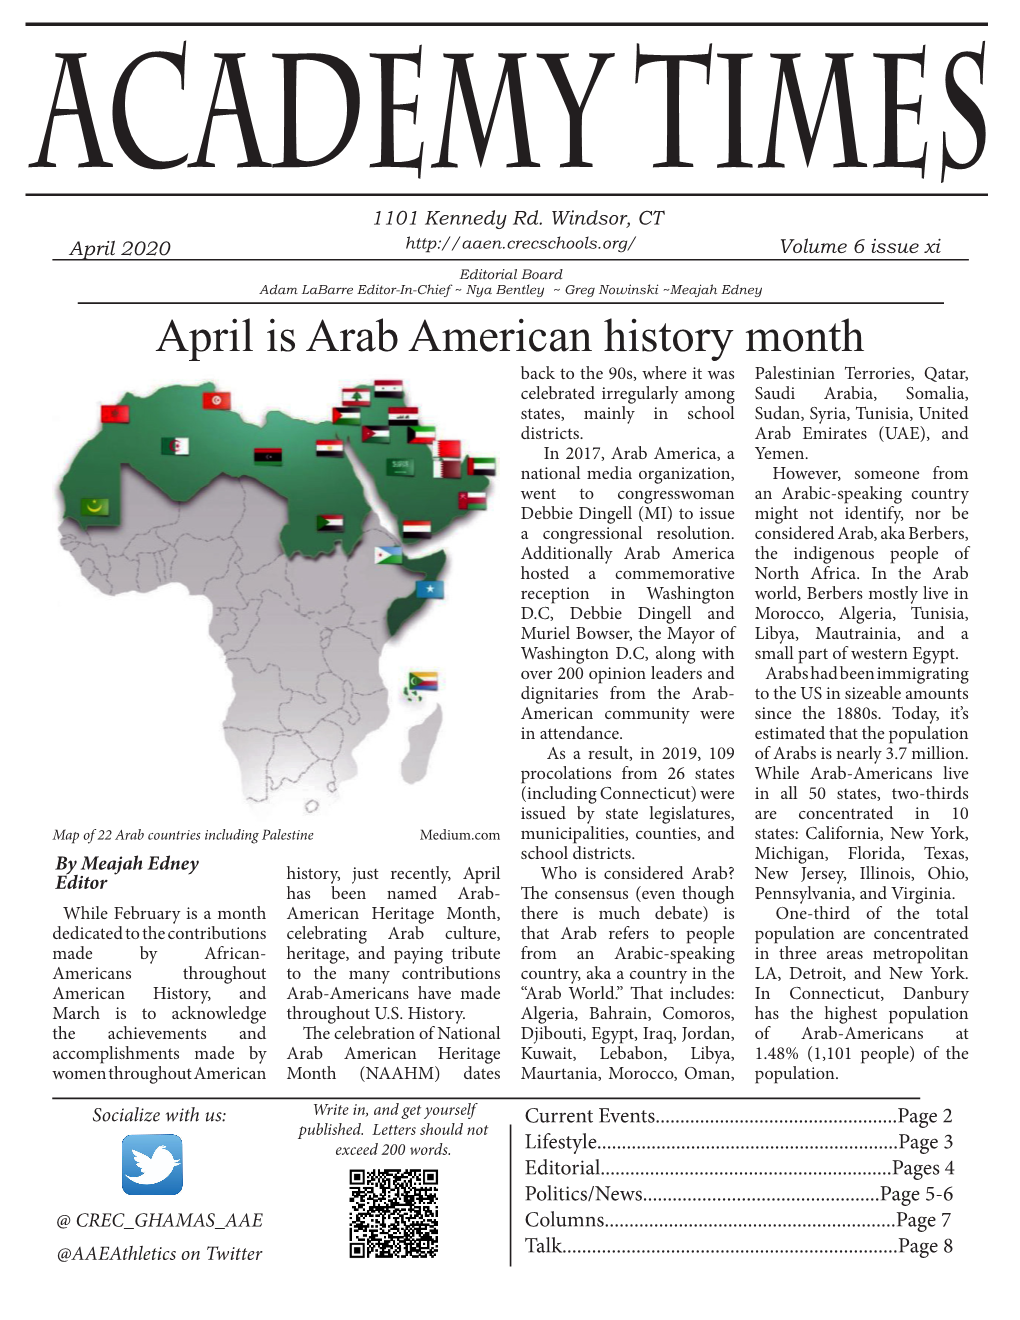 April Is Arab American History Month